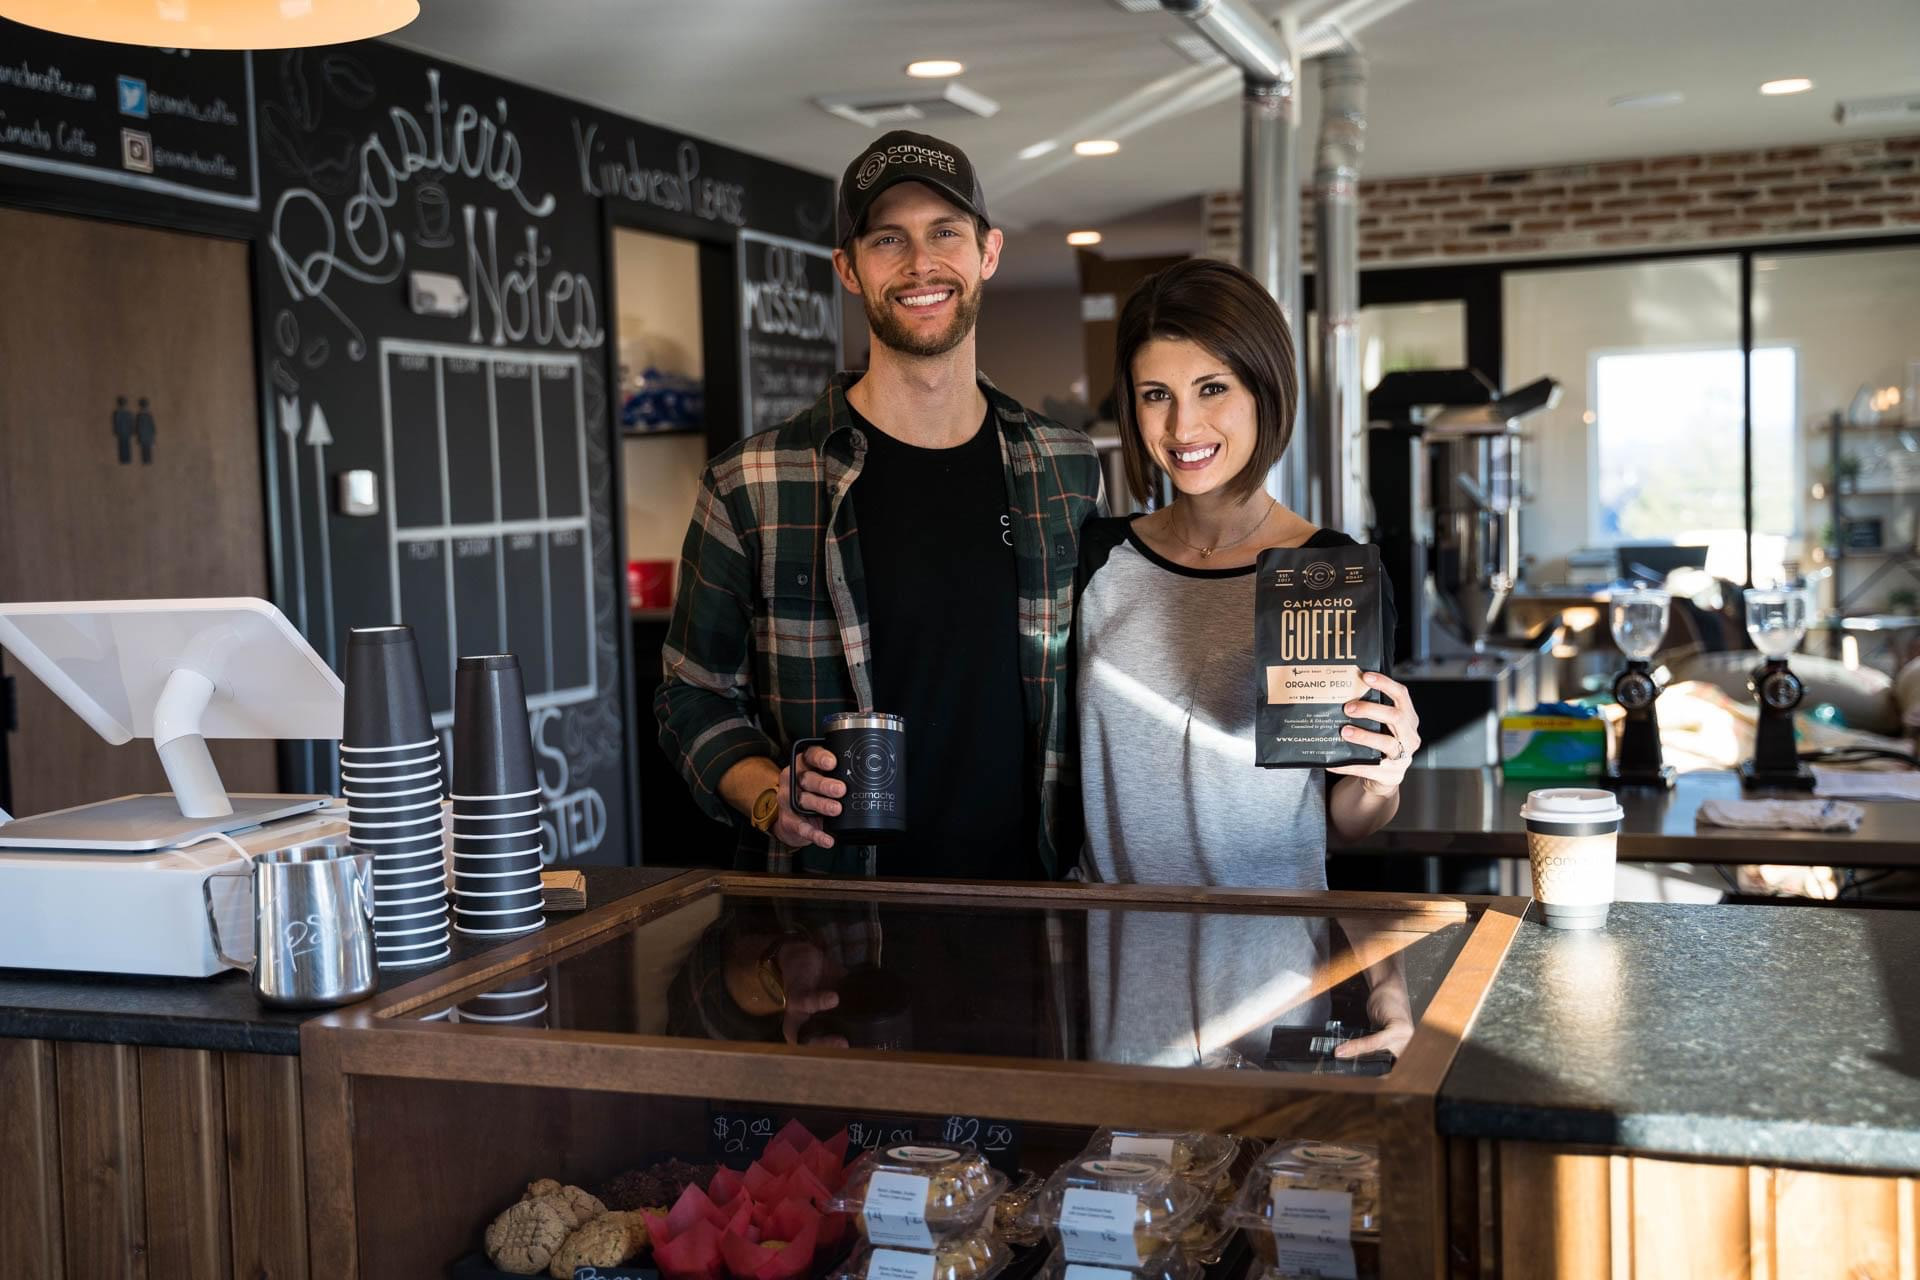 Jesse Walter wearing a plaid shirt and baseball cap, standing next to his wife, Megan, in her t-shirt, smiling at the camera while holding bags of their coffee.